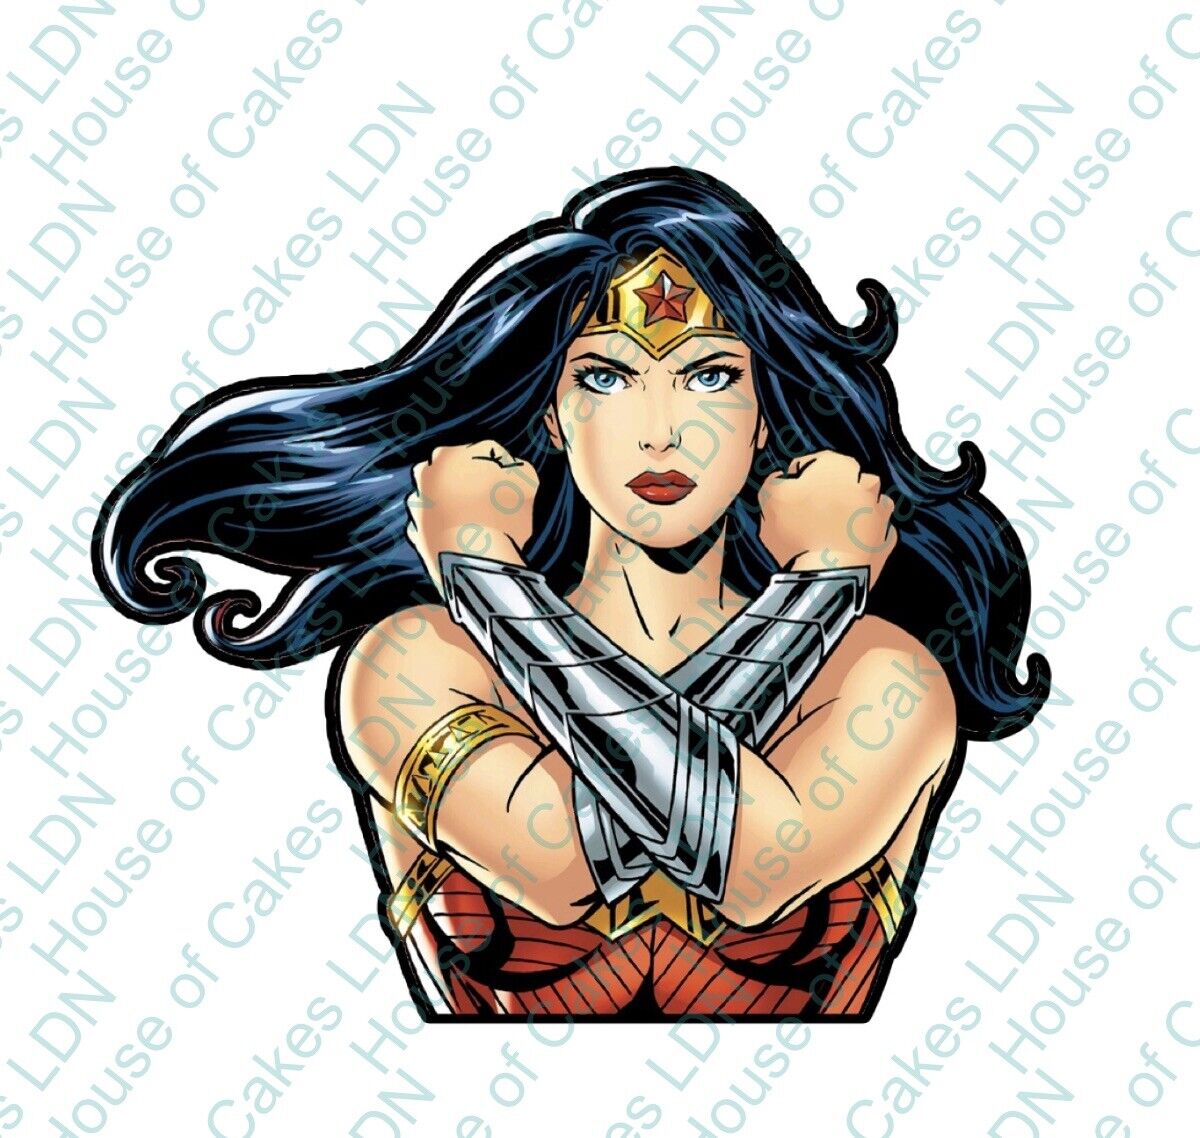 WONDER WOMAN 5 INCH EDIBLE ICING PRE-CUT BIRTHDAY CAKE TOPPER DECORATION